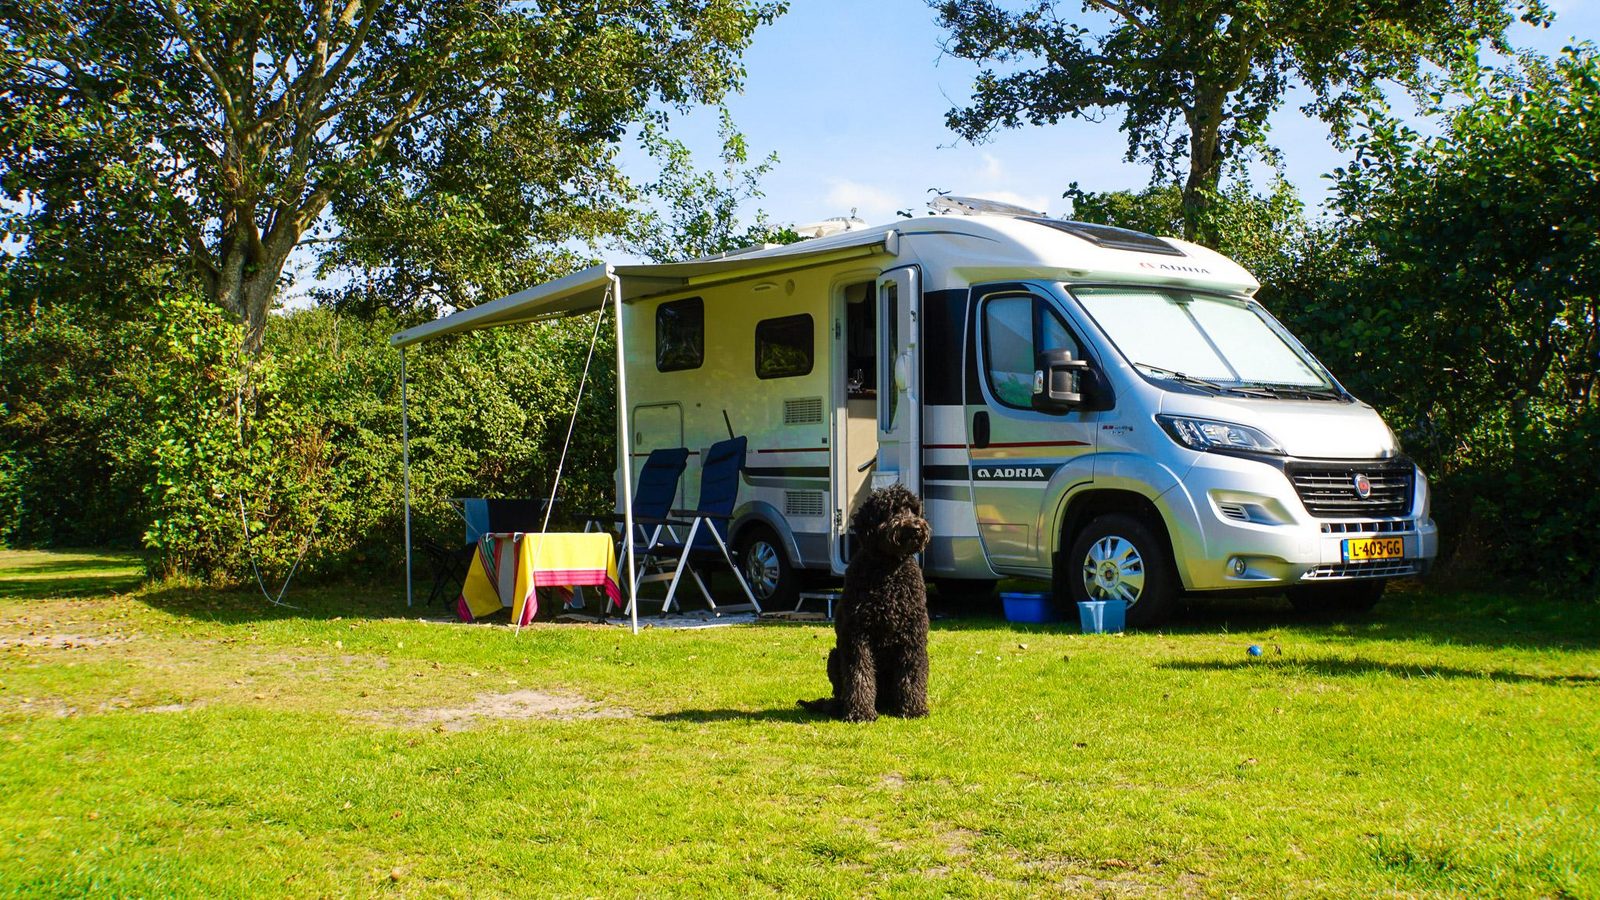 Take a look at our camping spots